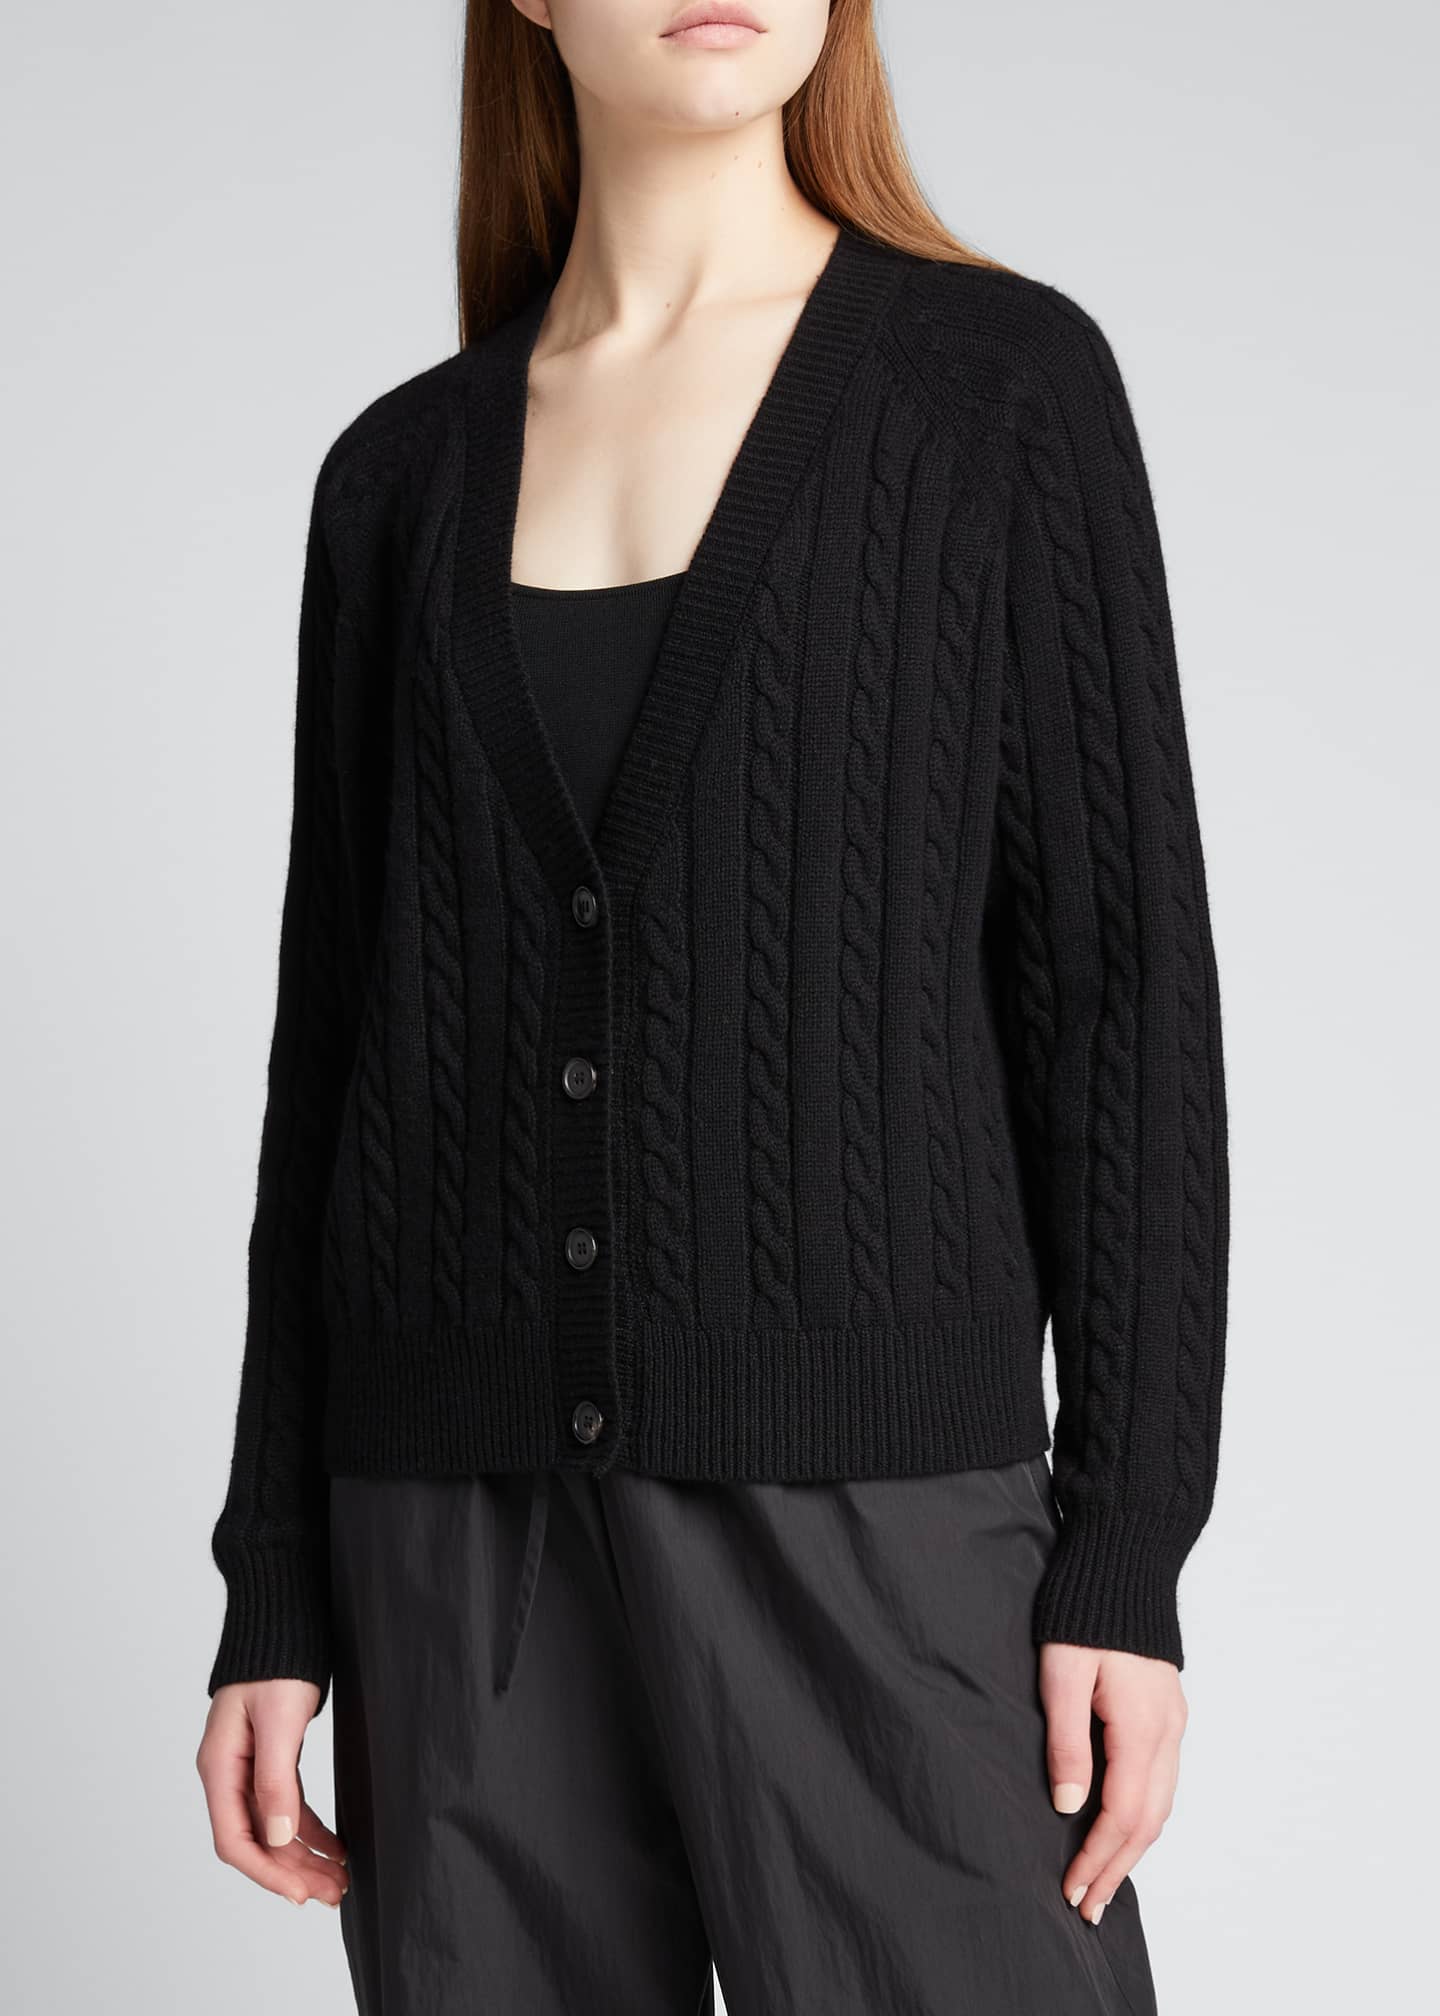 Co V-Neck Cashmere Cable-Knit Cardigan - Bergdorf Goodman